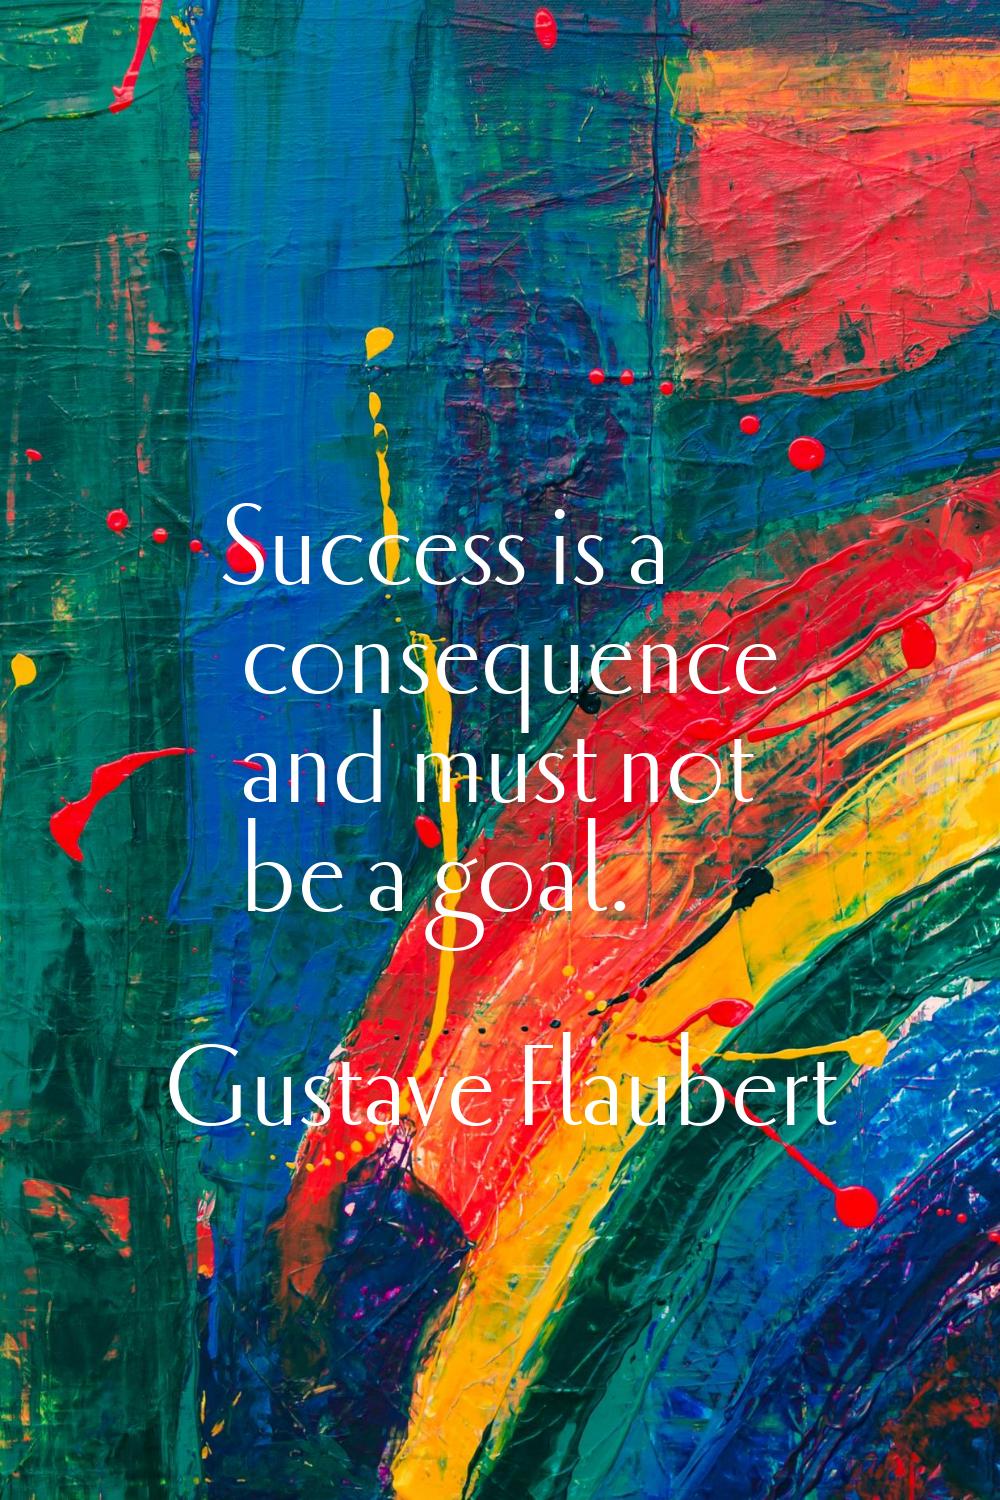 Success is a consequence and must not be a goal.